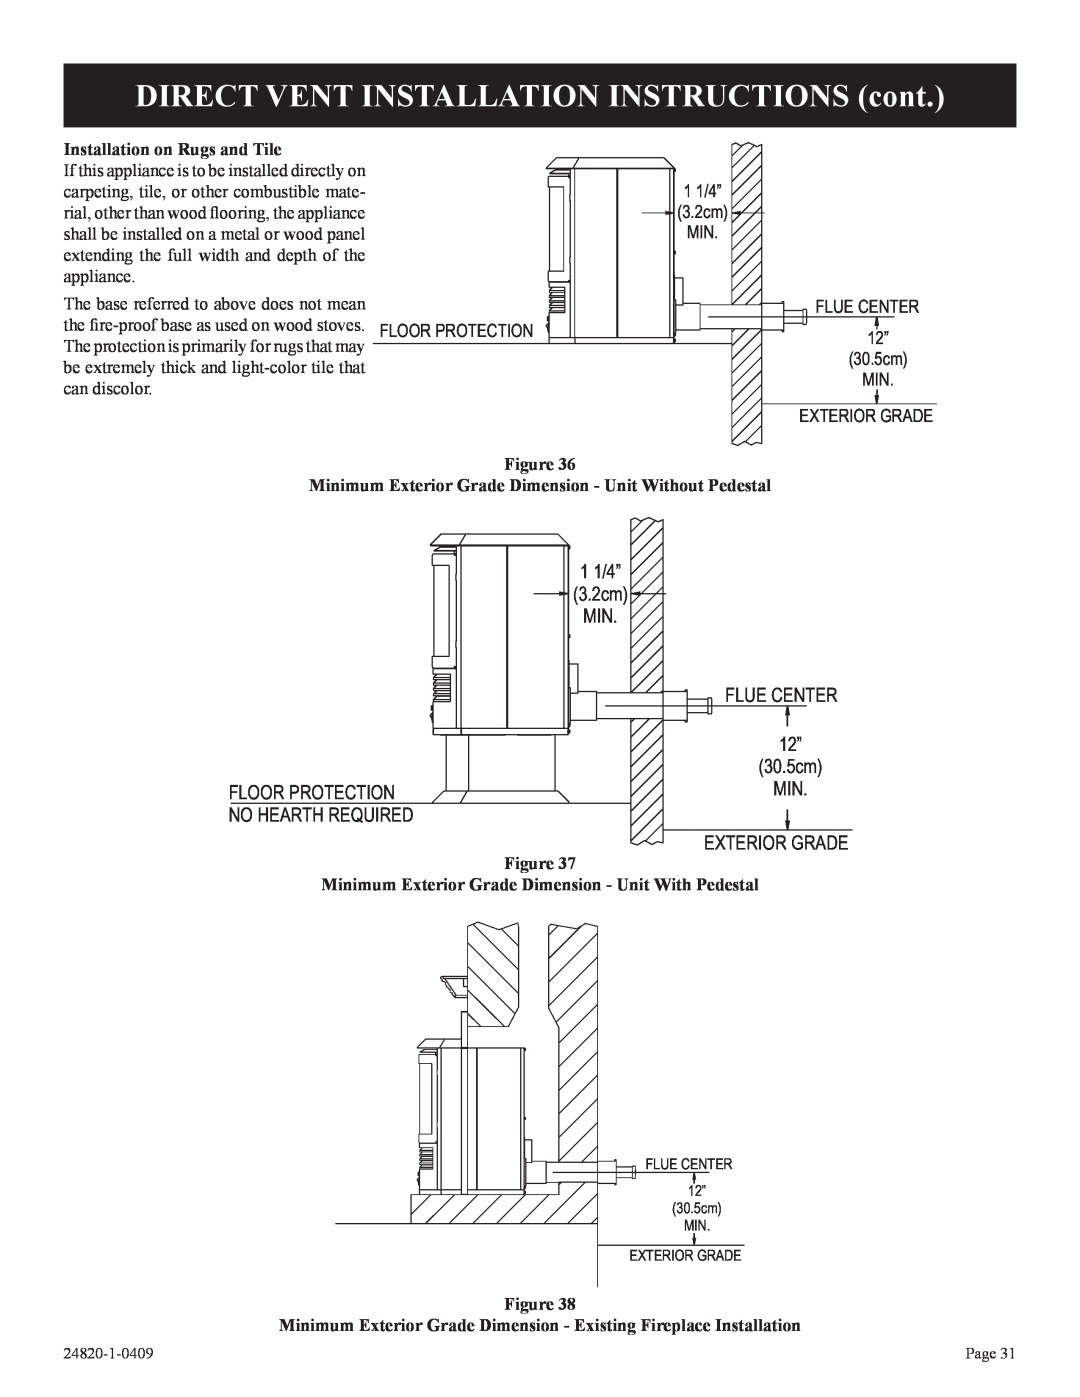 Empire Comfort Systems PV-28SV55-(C,G)(N,P)-1 DIRECT VENT INSTALLATION INSTRUCTIONS cont, Exterior Grade 